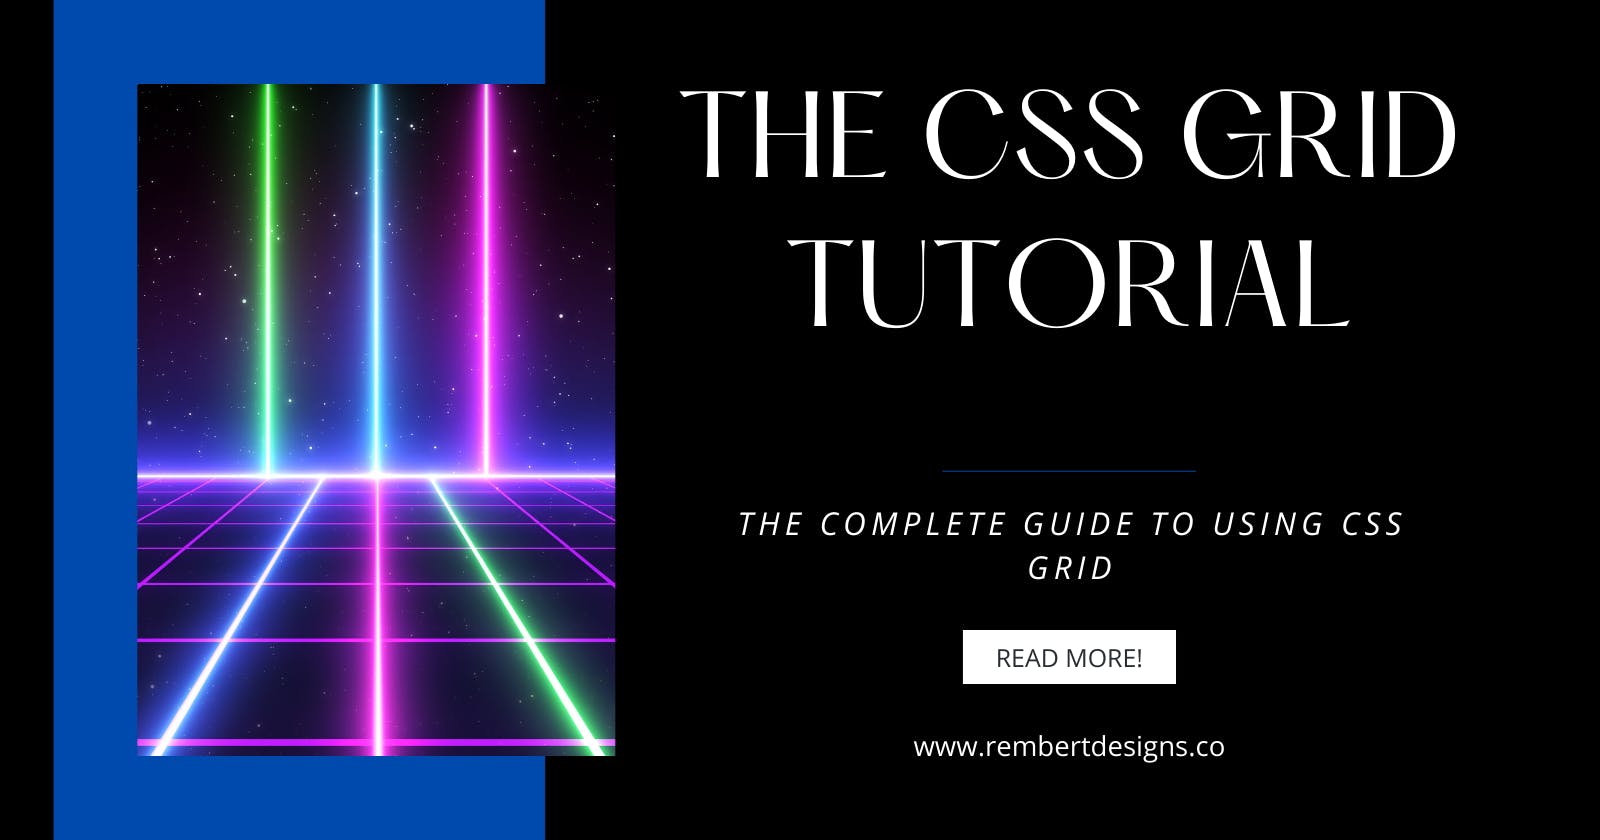 The CSS Grid Tutorial